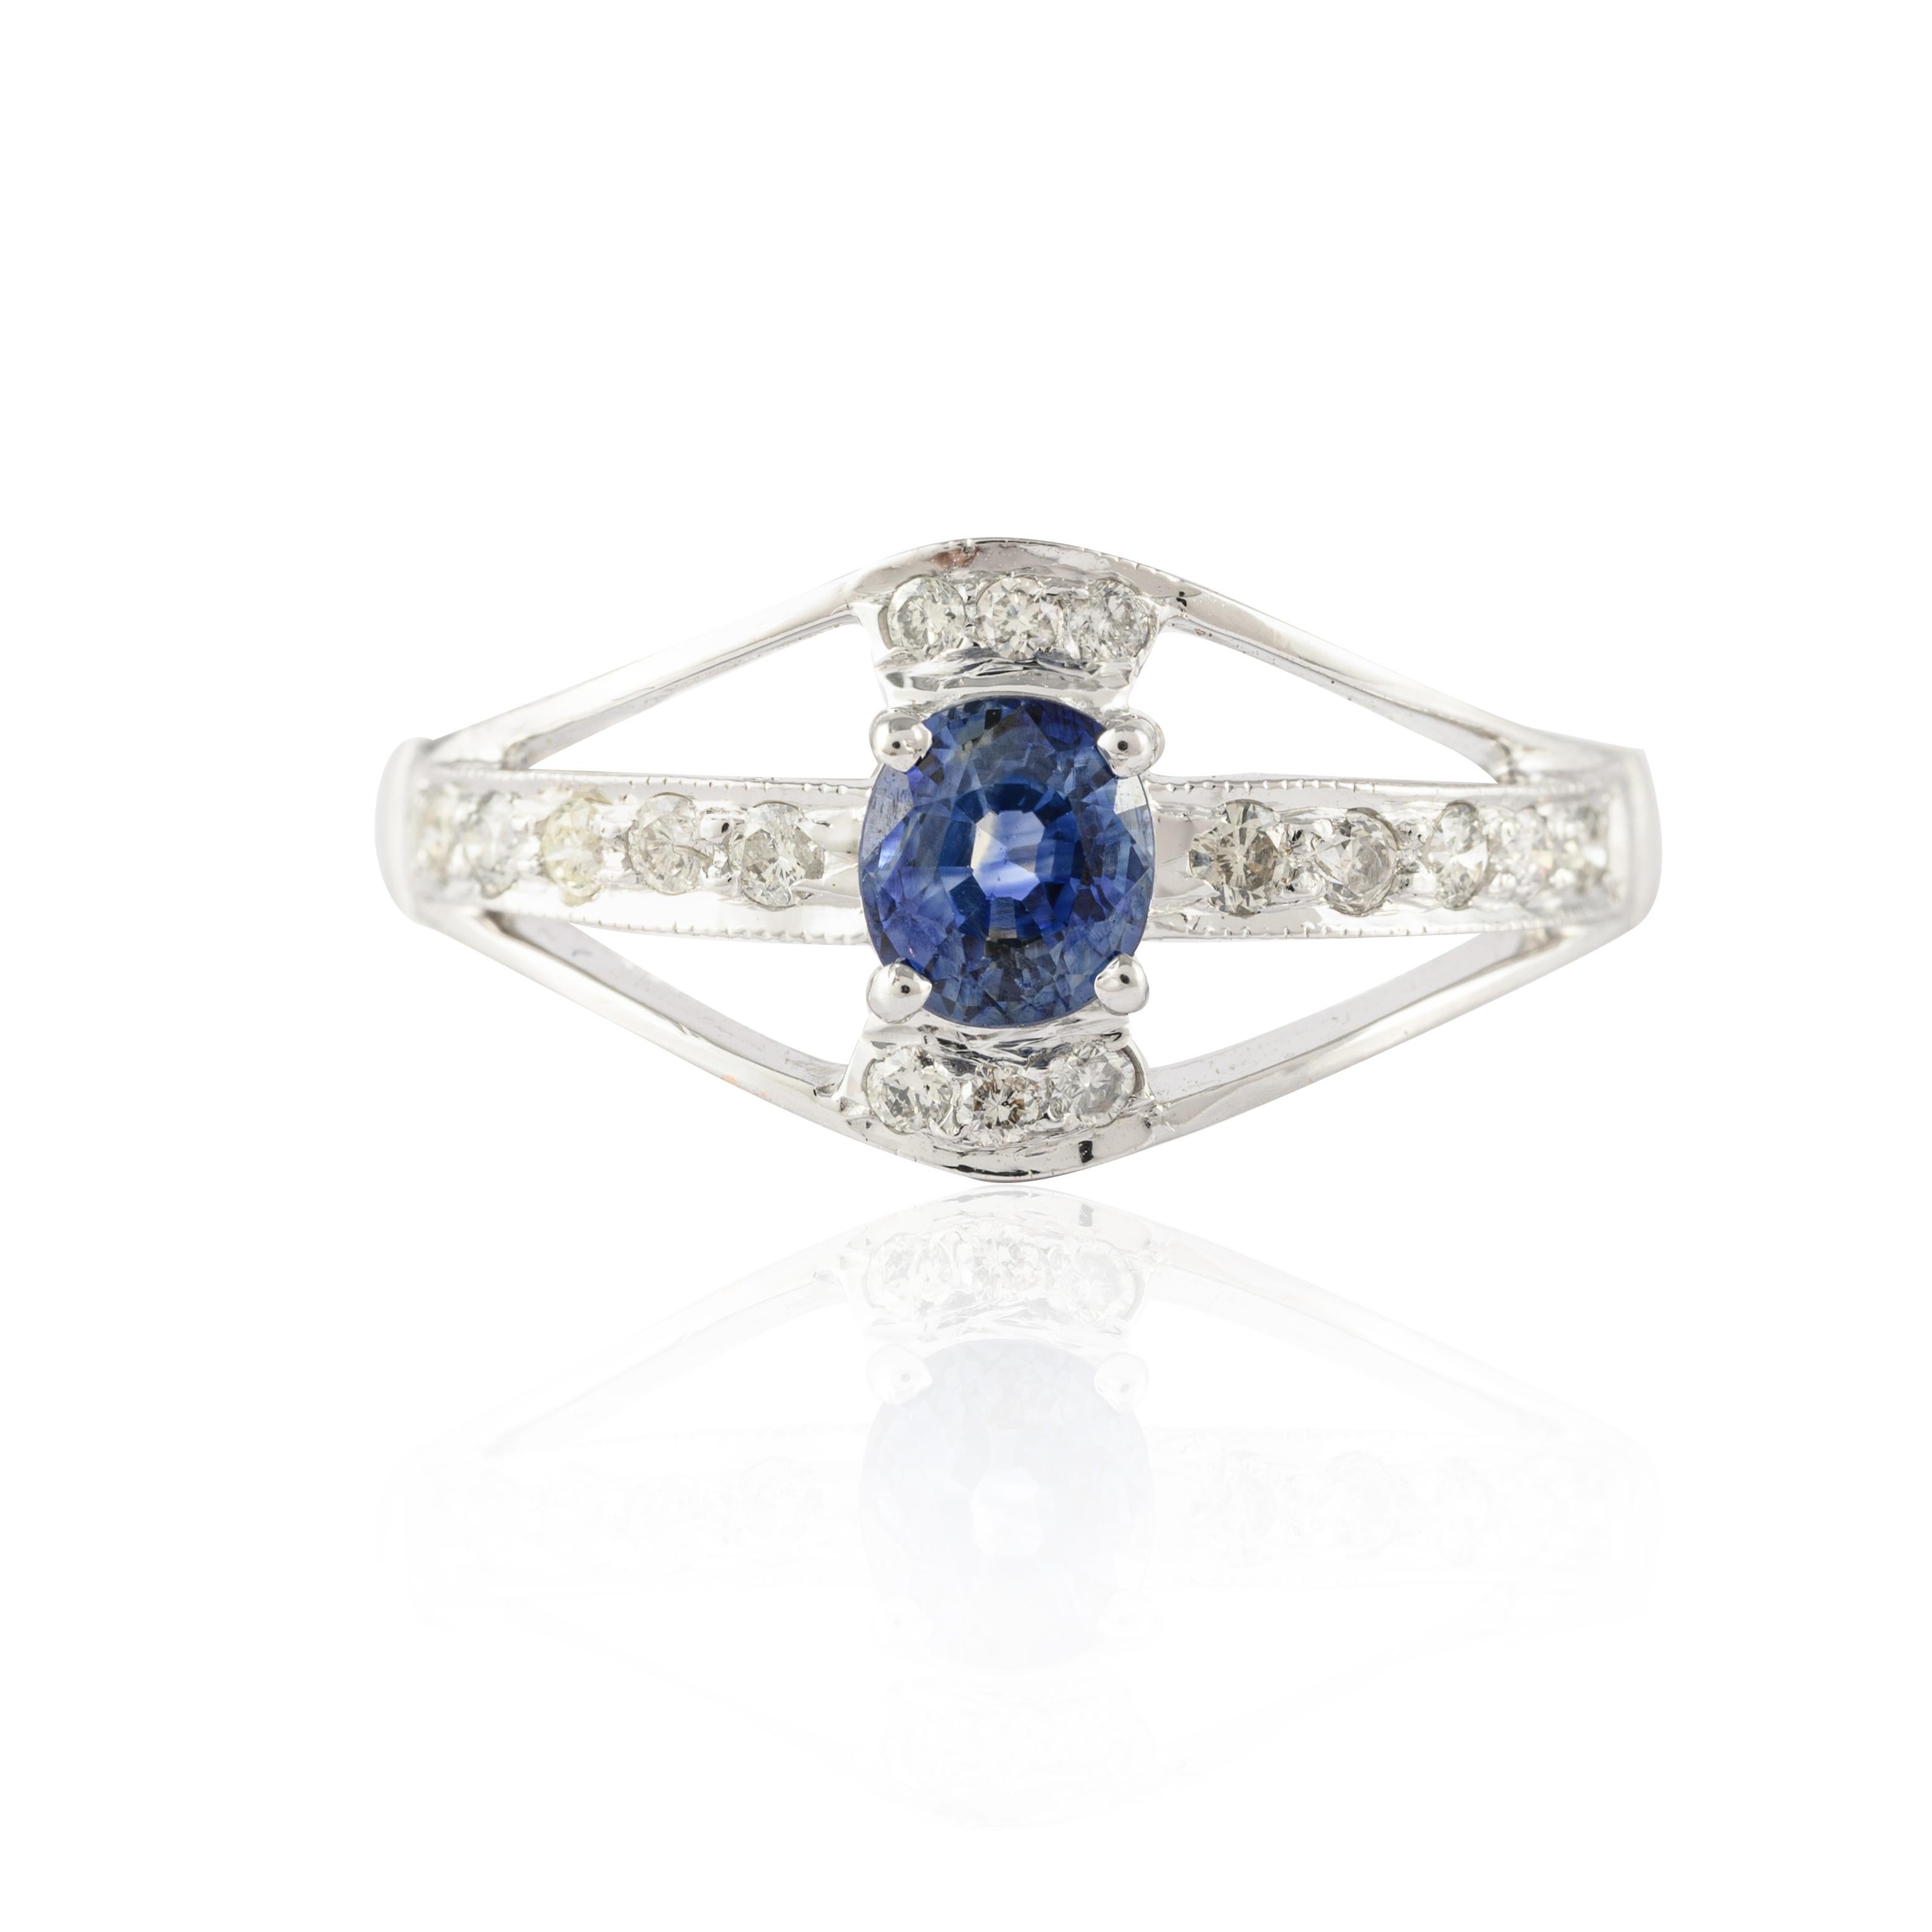 For Sale:  Elegant Diamond and Blue Sapphire Ring in 14k Solid White Gold  3